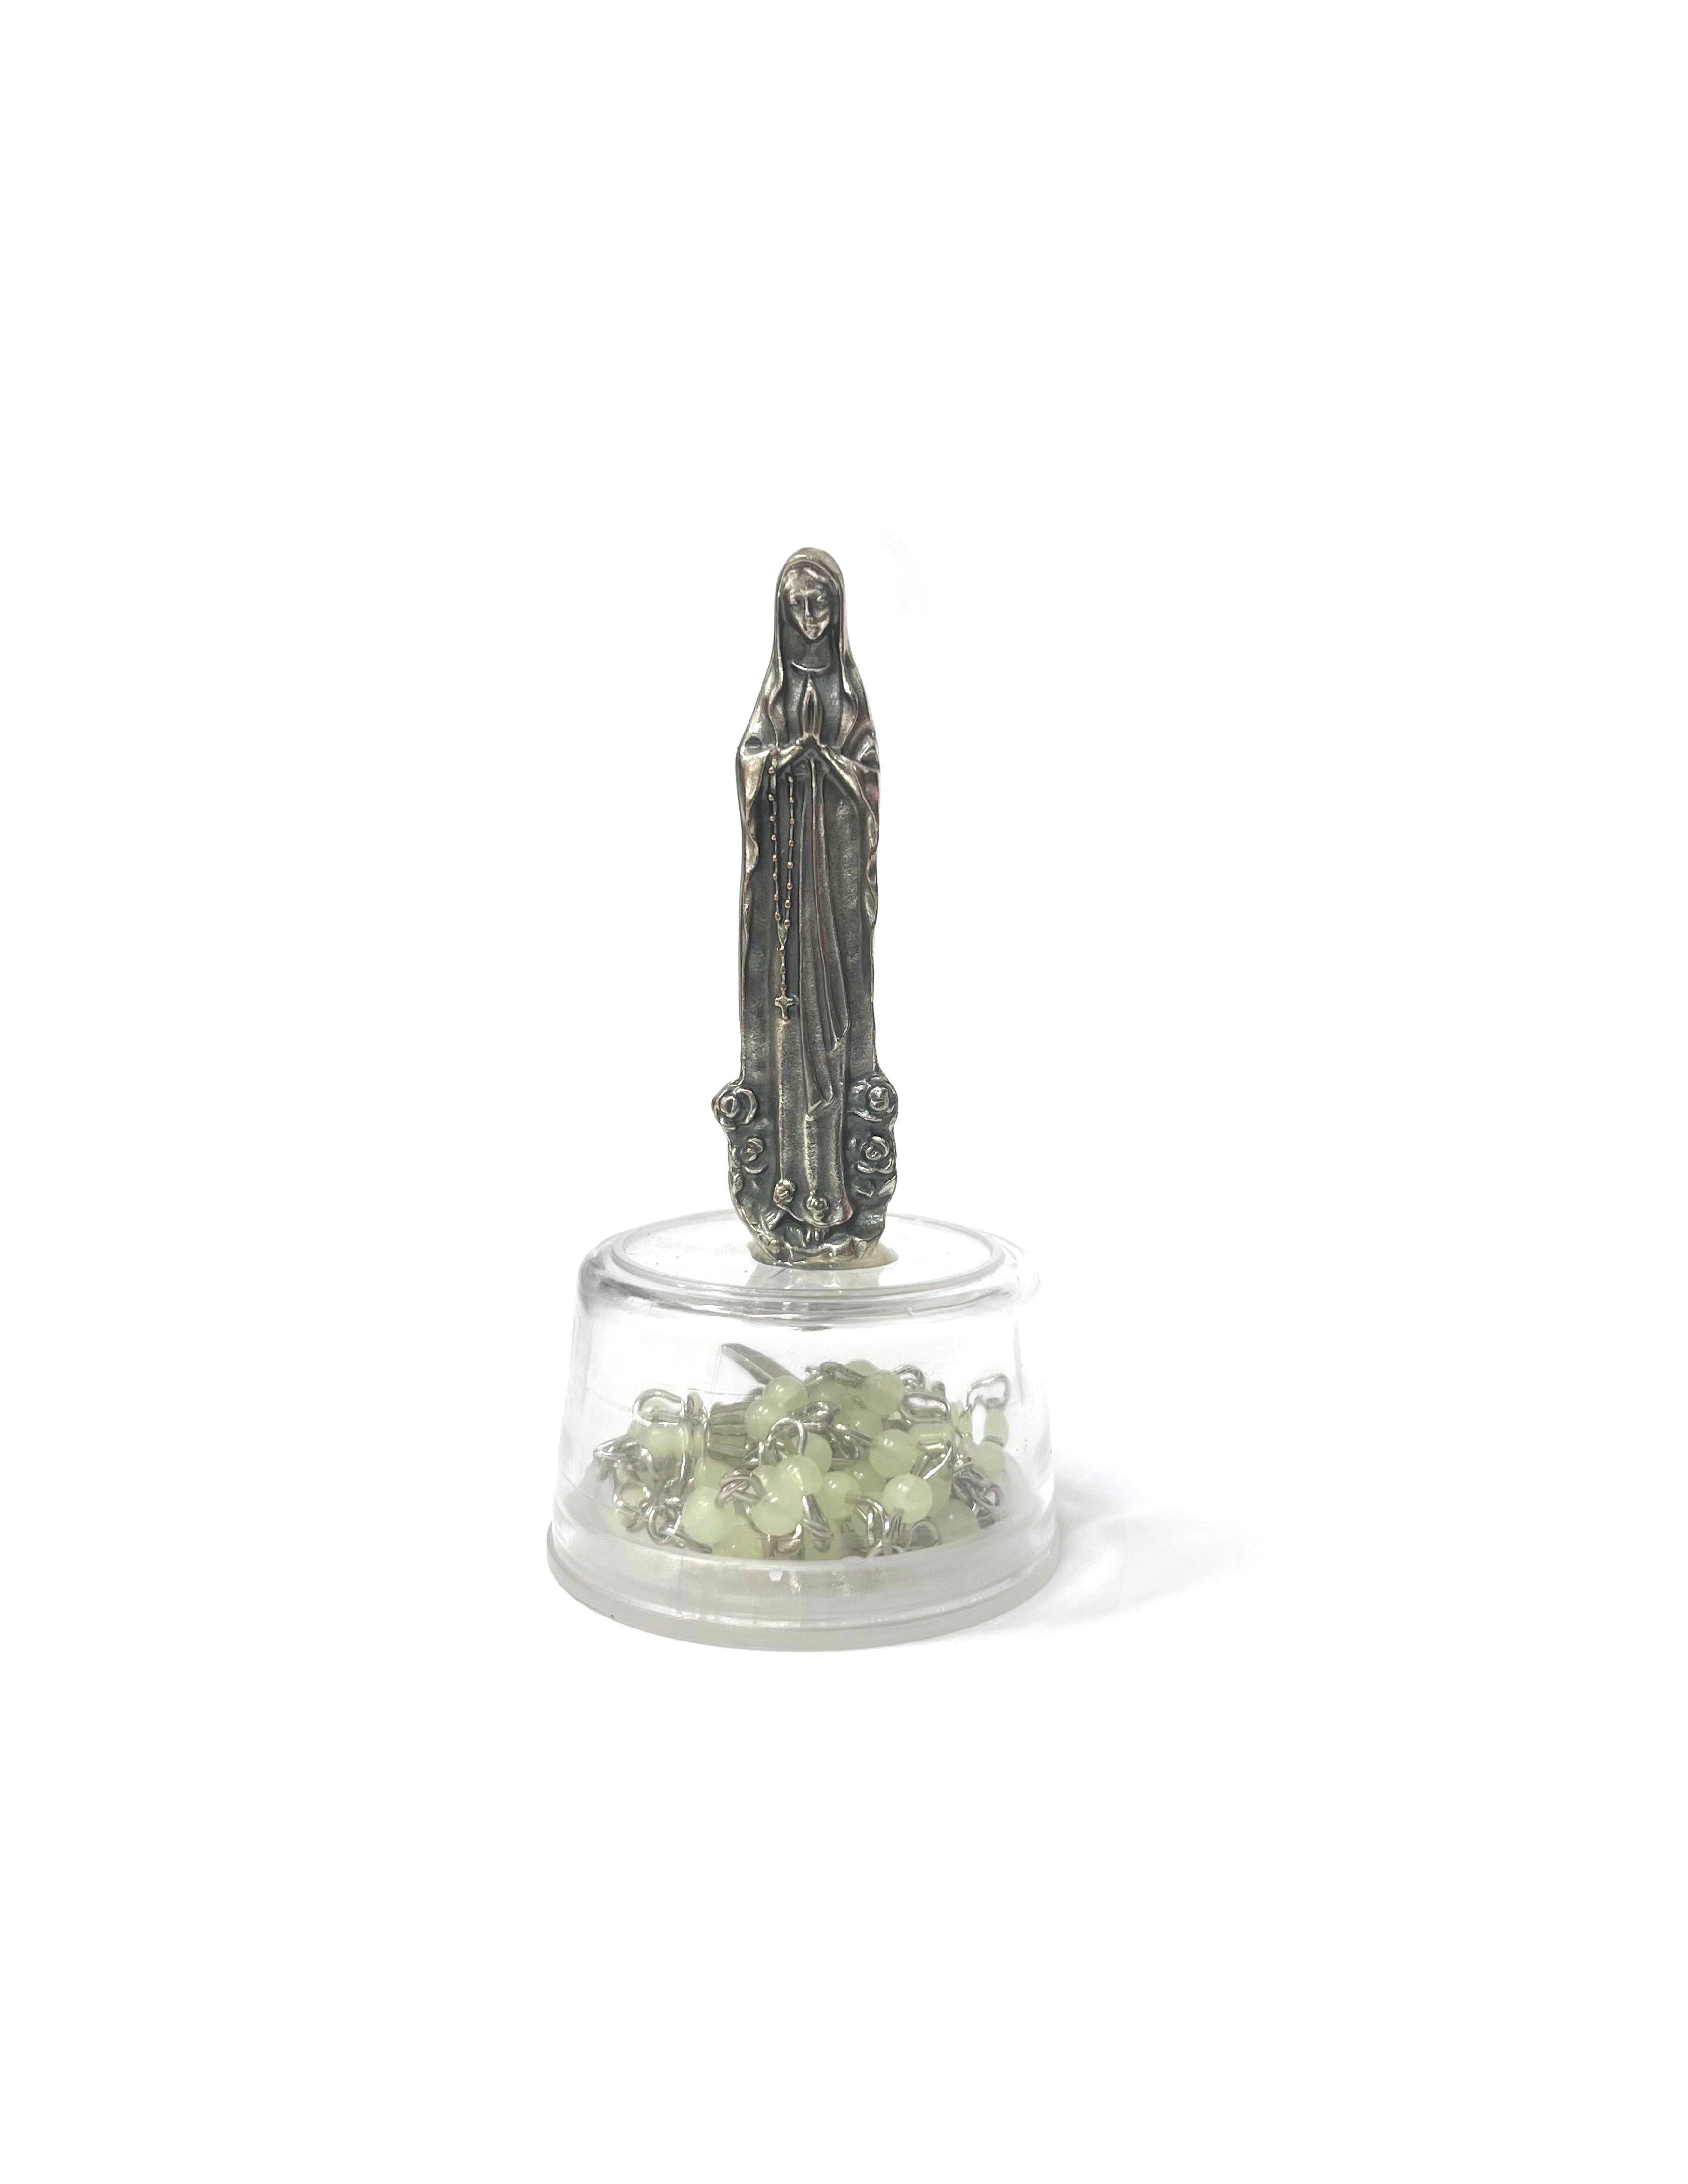 Virgin Mary decorated box with silvered rosary with colorful plastic beads